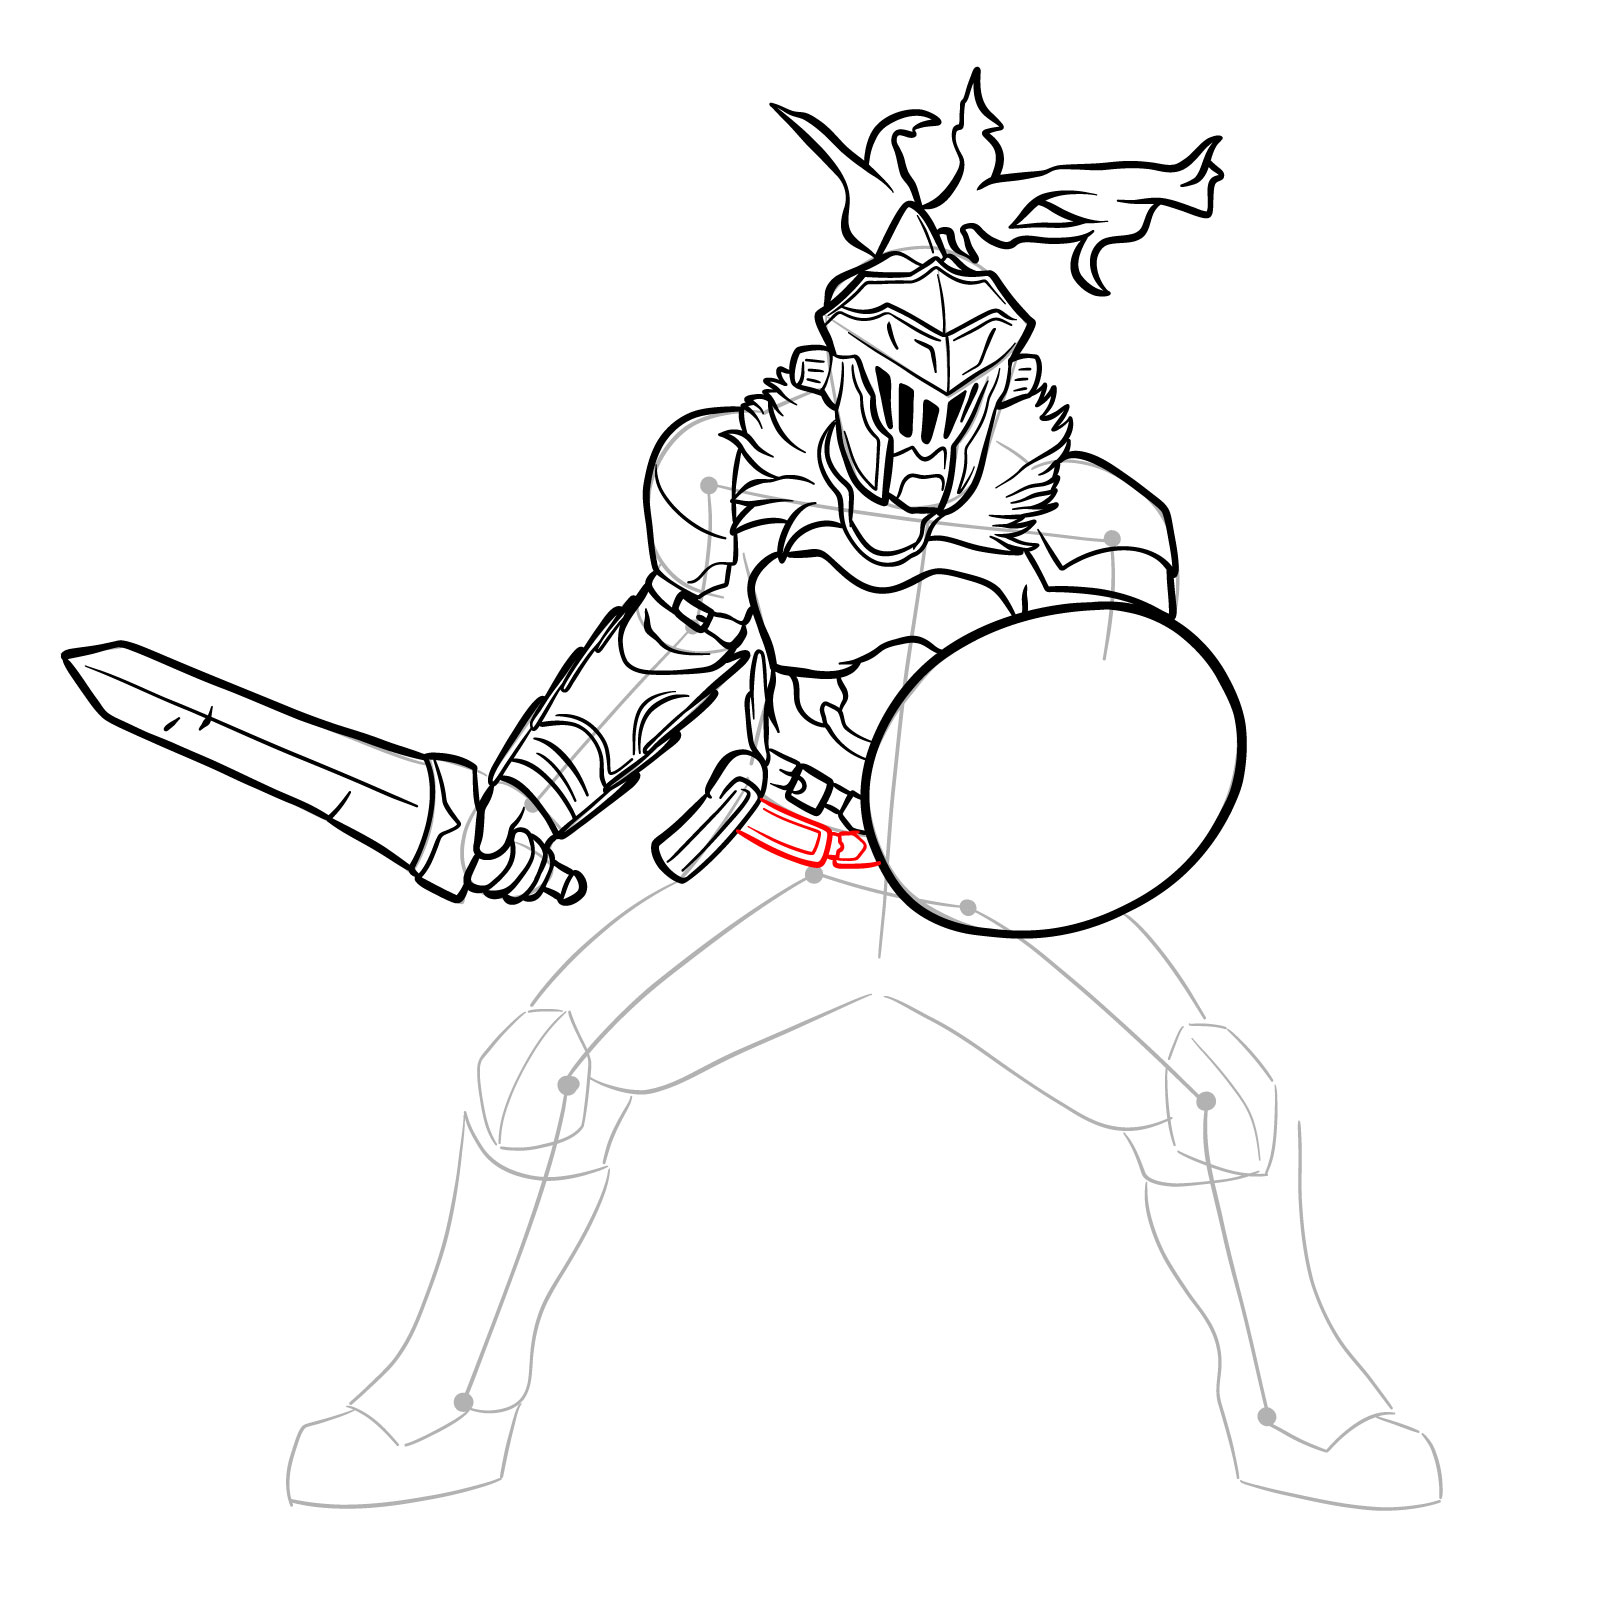 How to Draw Goblin Slayer in battle stance - step 26